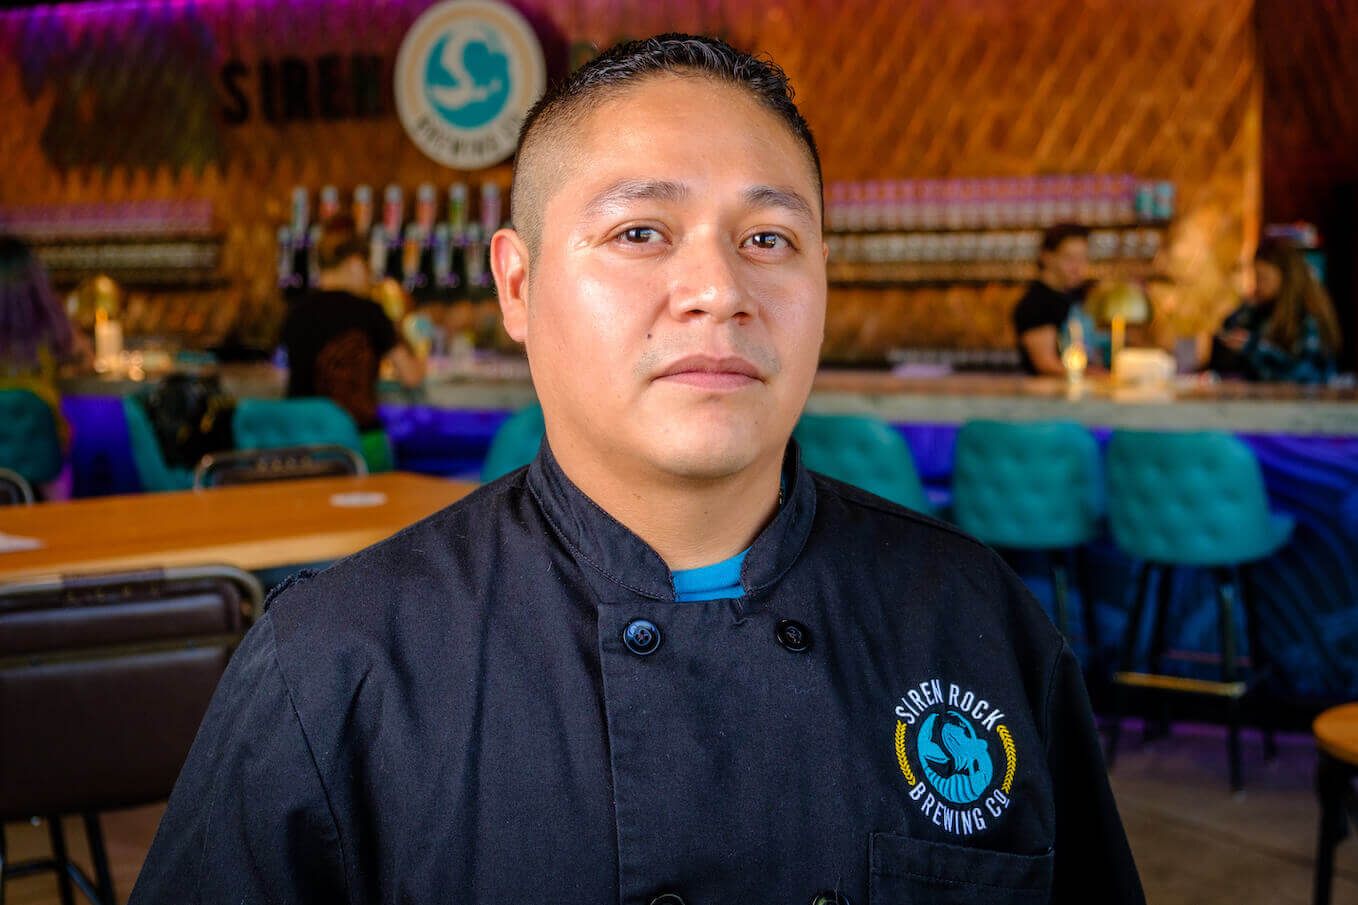 Luis Reyes, kitchen manager, at Siren Rock Brewing Company